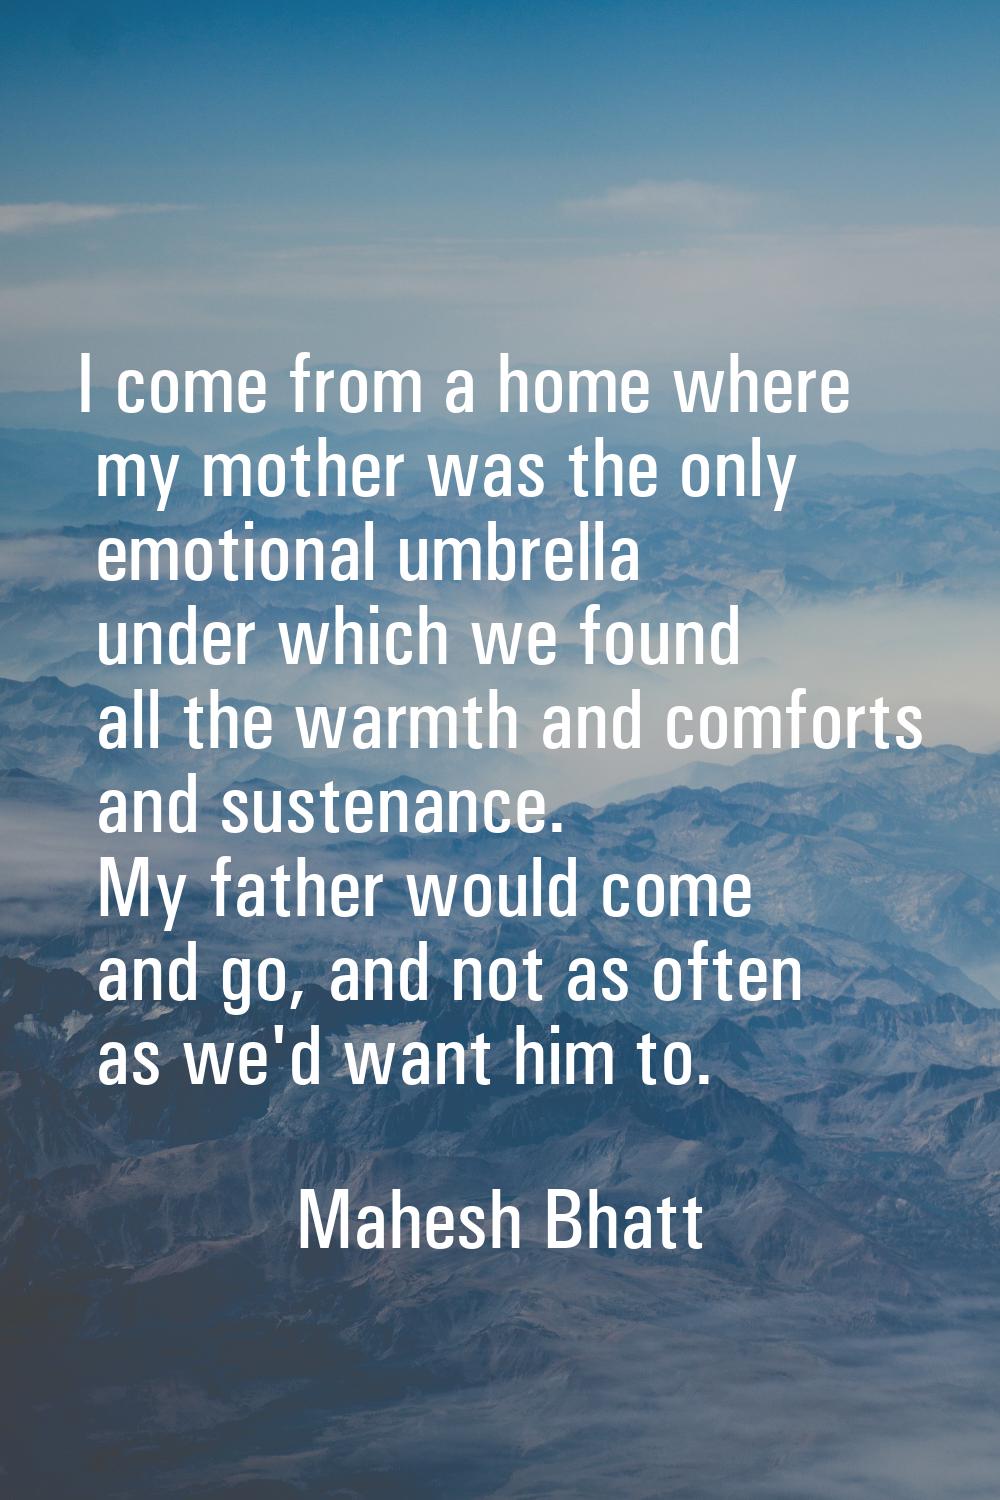 I come from a home where my mother was the only emotional umbrella under which we found all the war